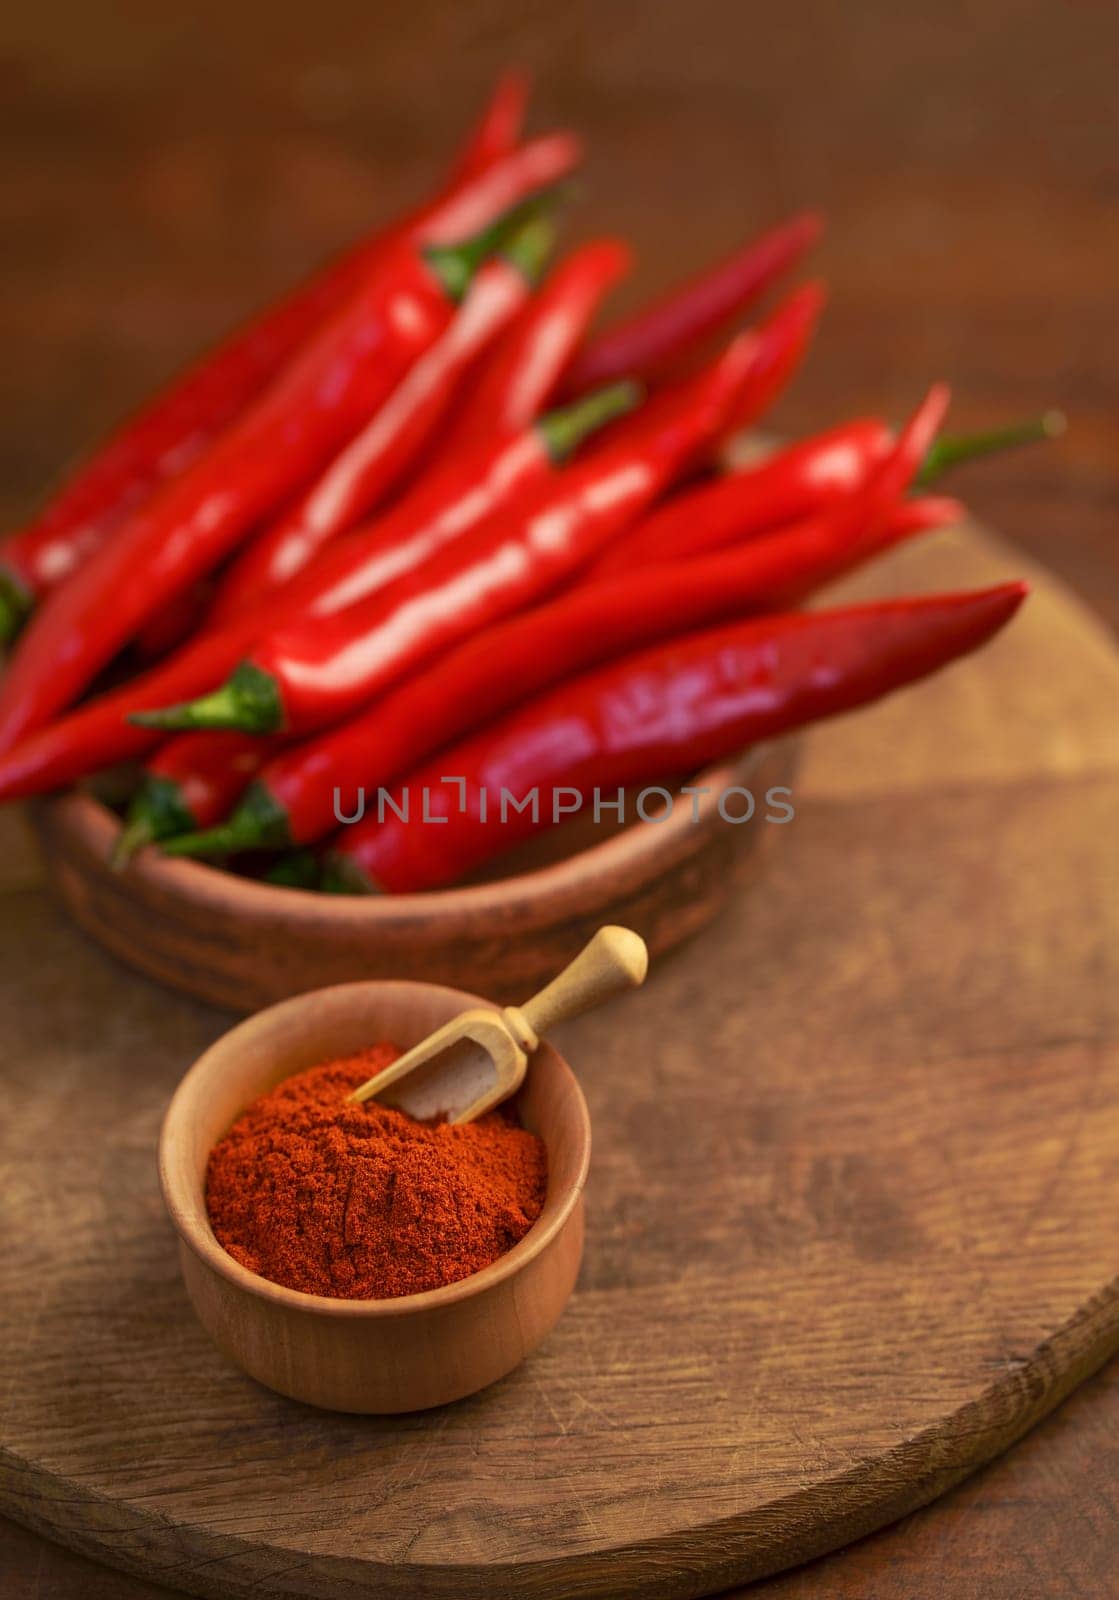 Red hot chili peppers on old wooden table with spice